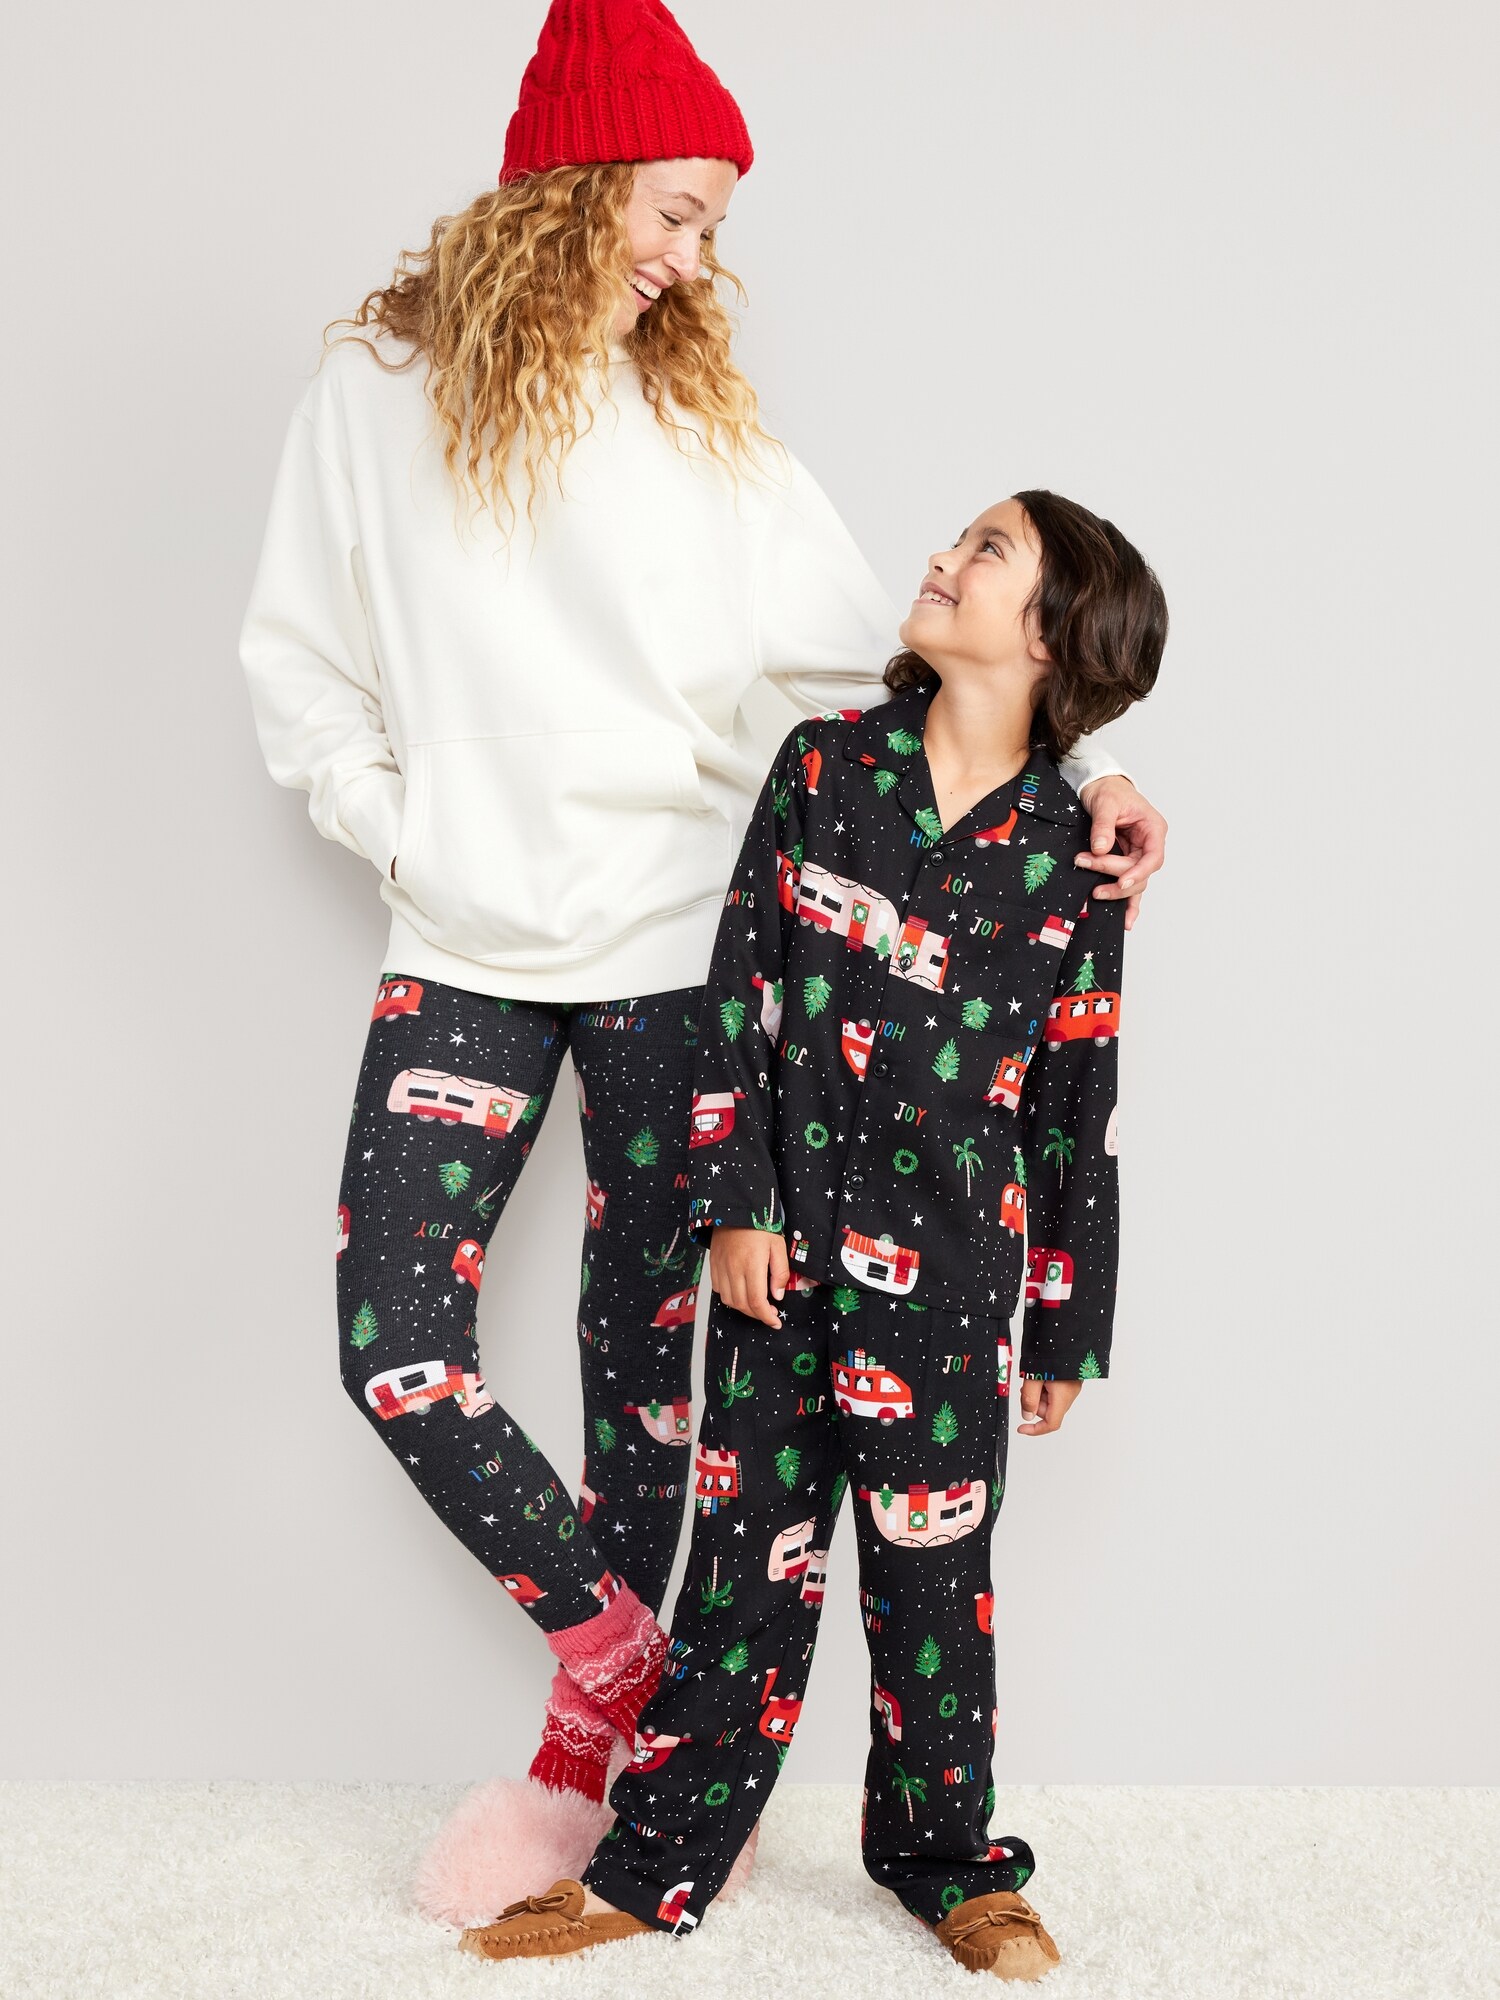 Matching Flannel Jogger Pajama Pants for Women